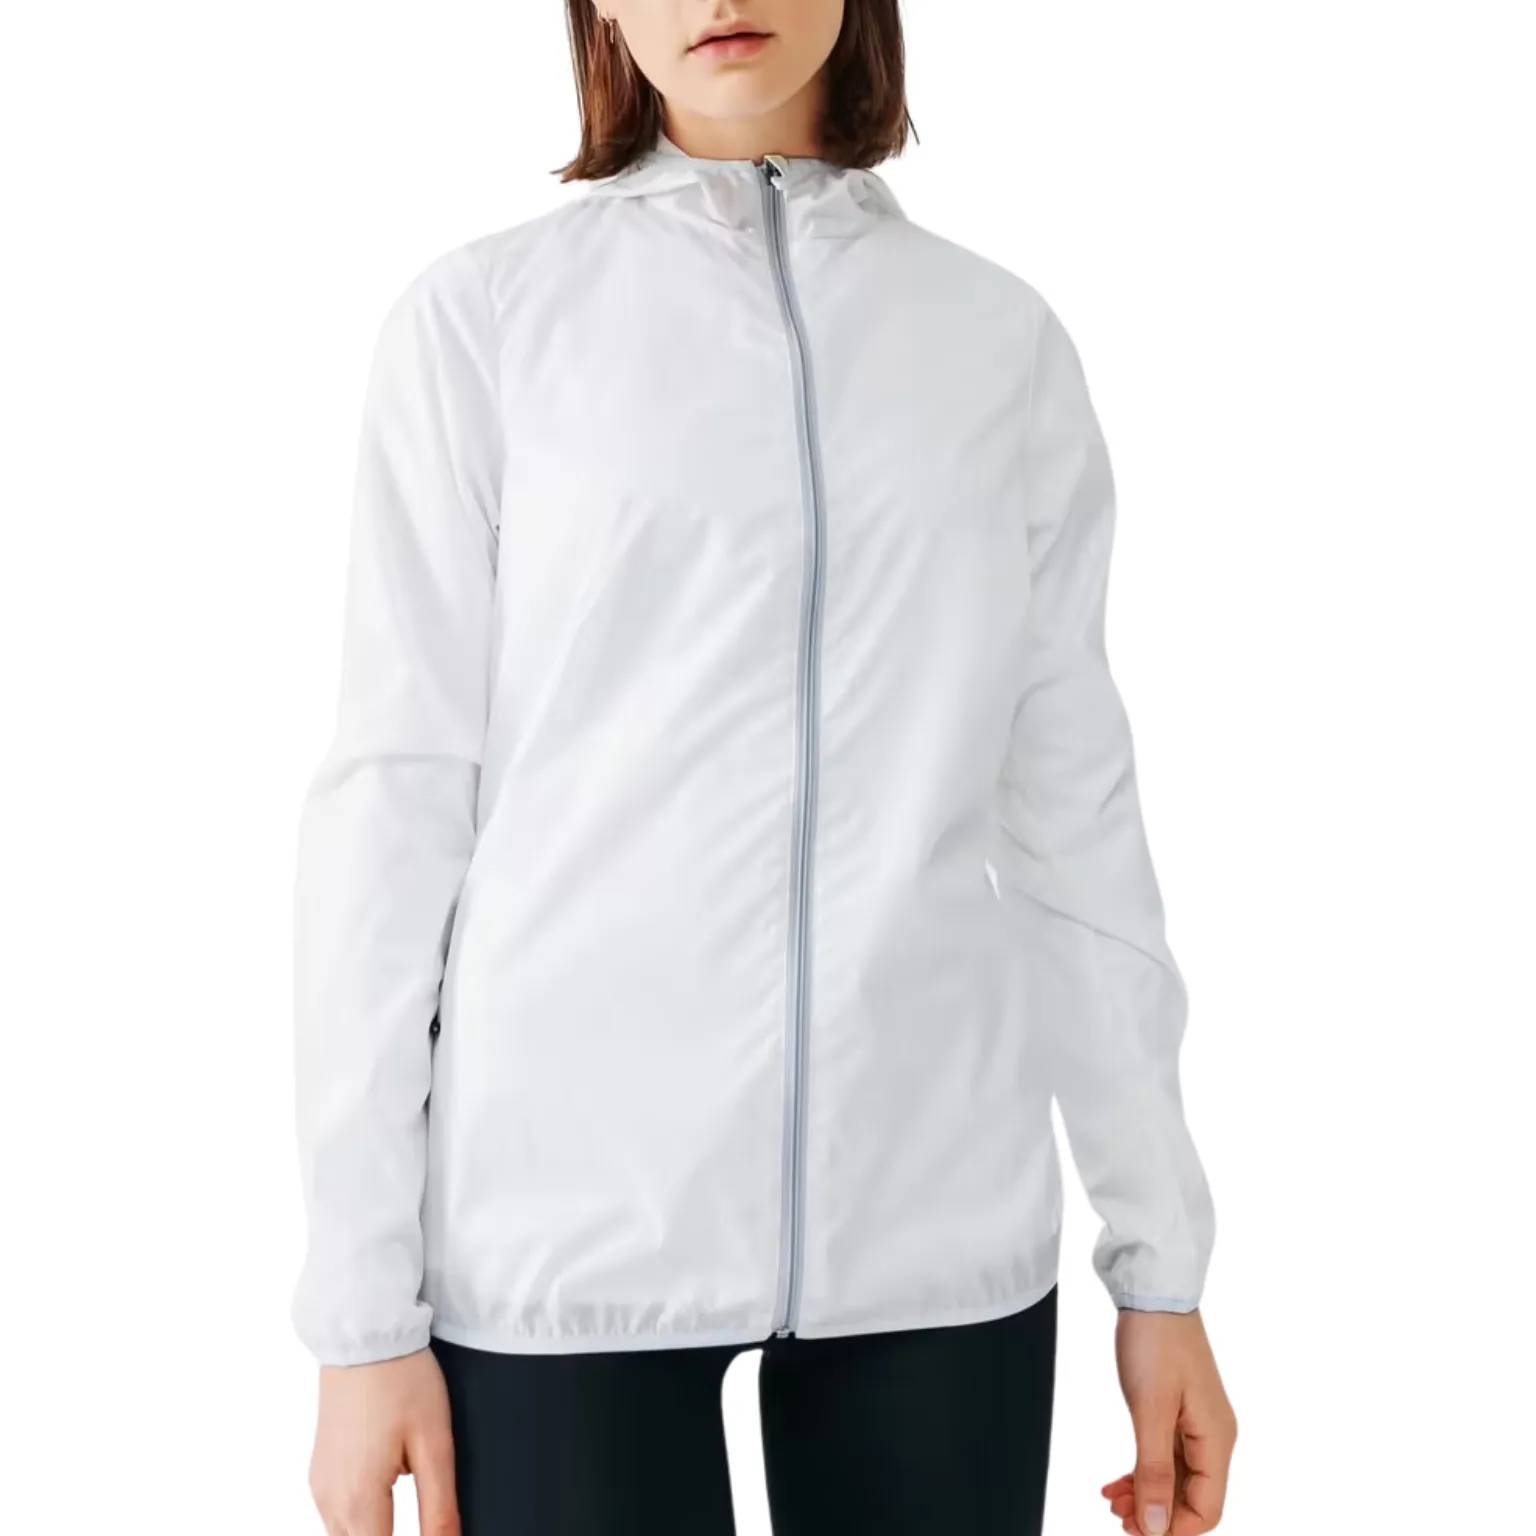 Windbreaker Jacket Manufacturing with superior quality